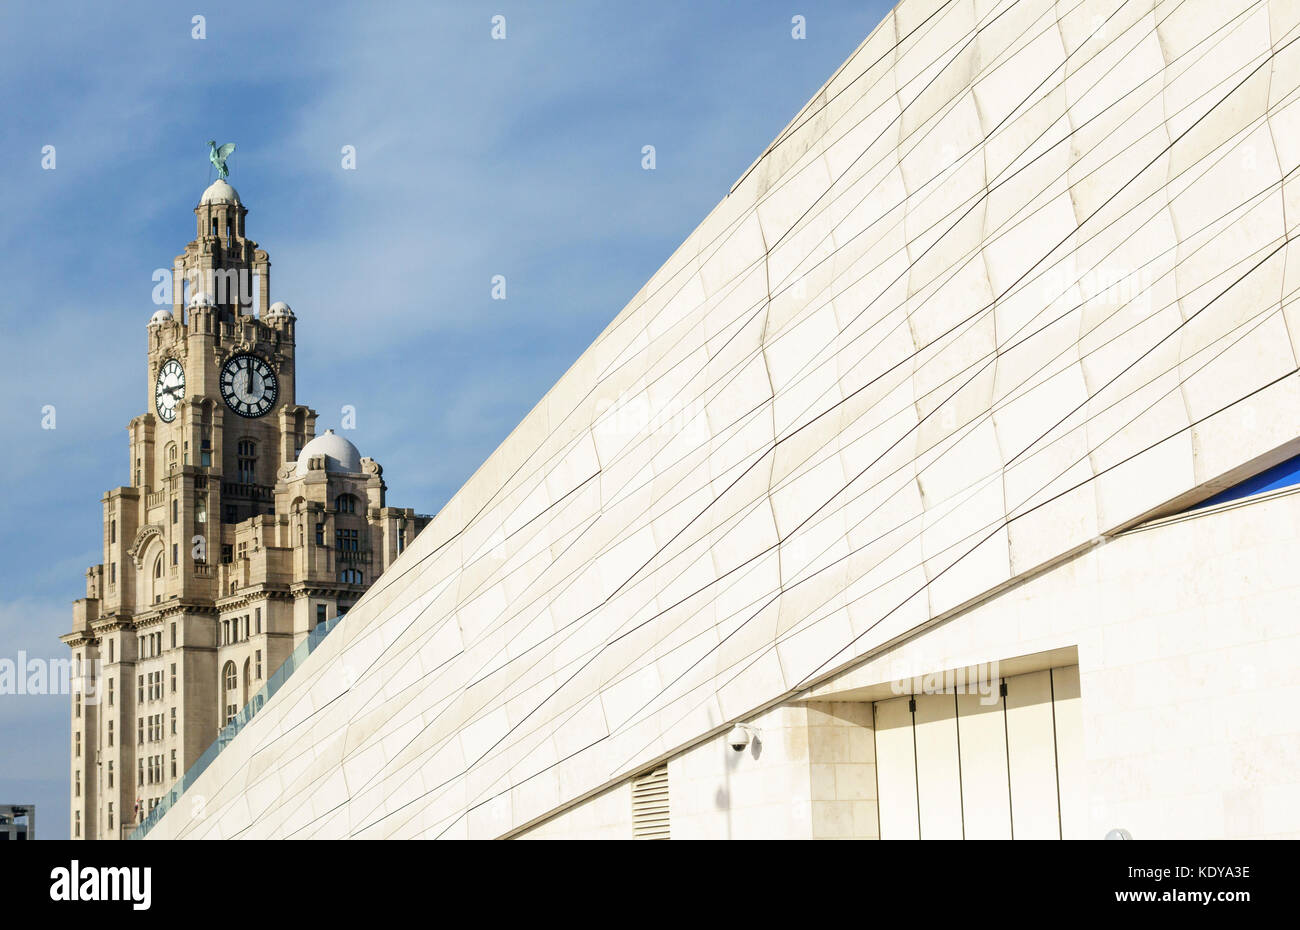 Pier Head, Liverpool, UK. The Royal Liver Building (1911) seen over the roof of the Museum of Liverpool (2011) on the River Mersey waterfront Stock Photo